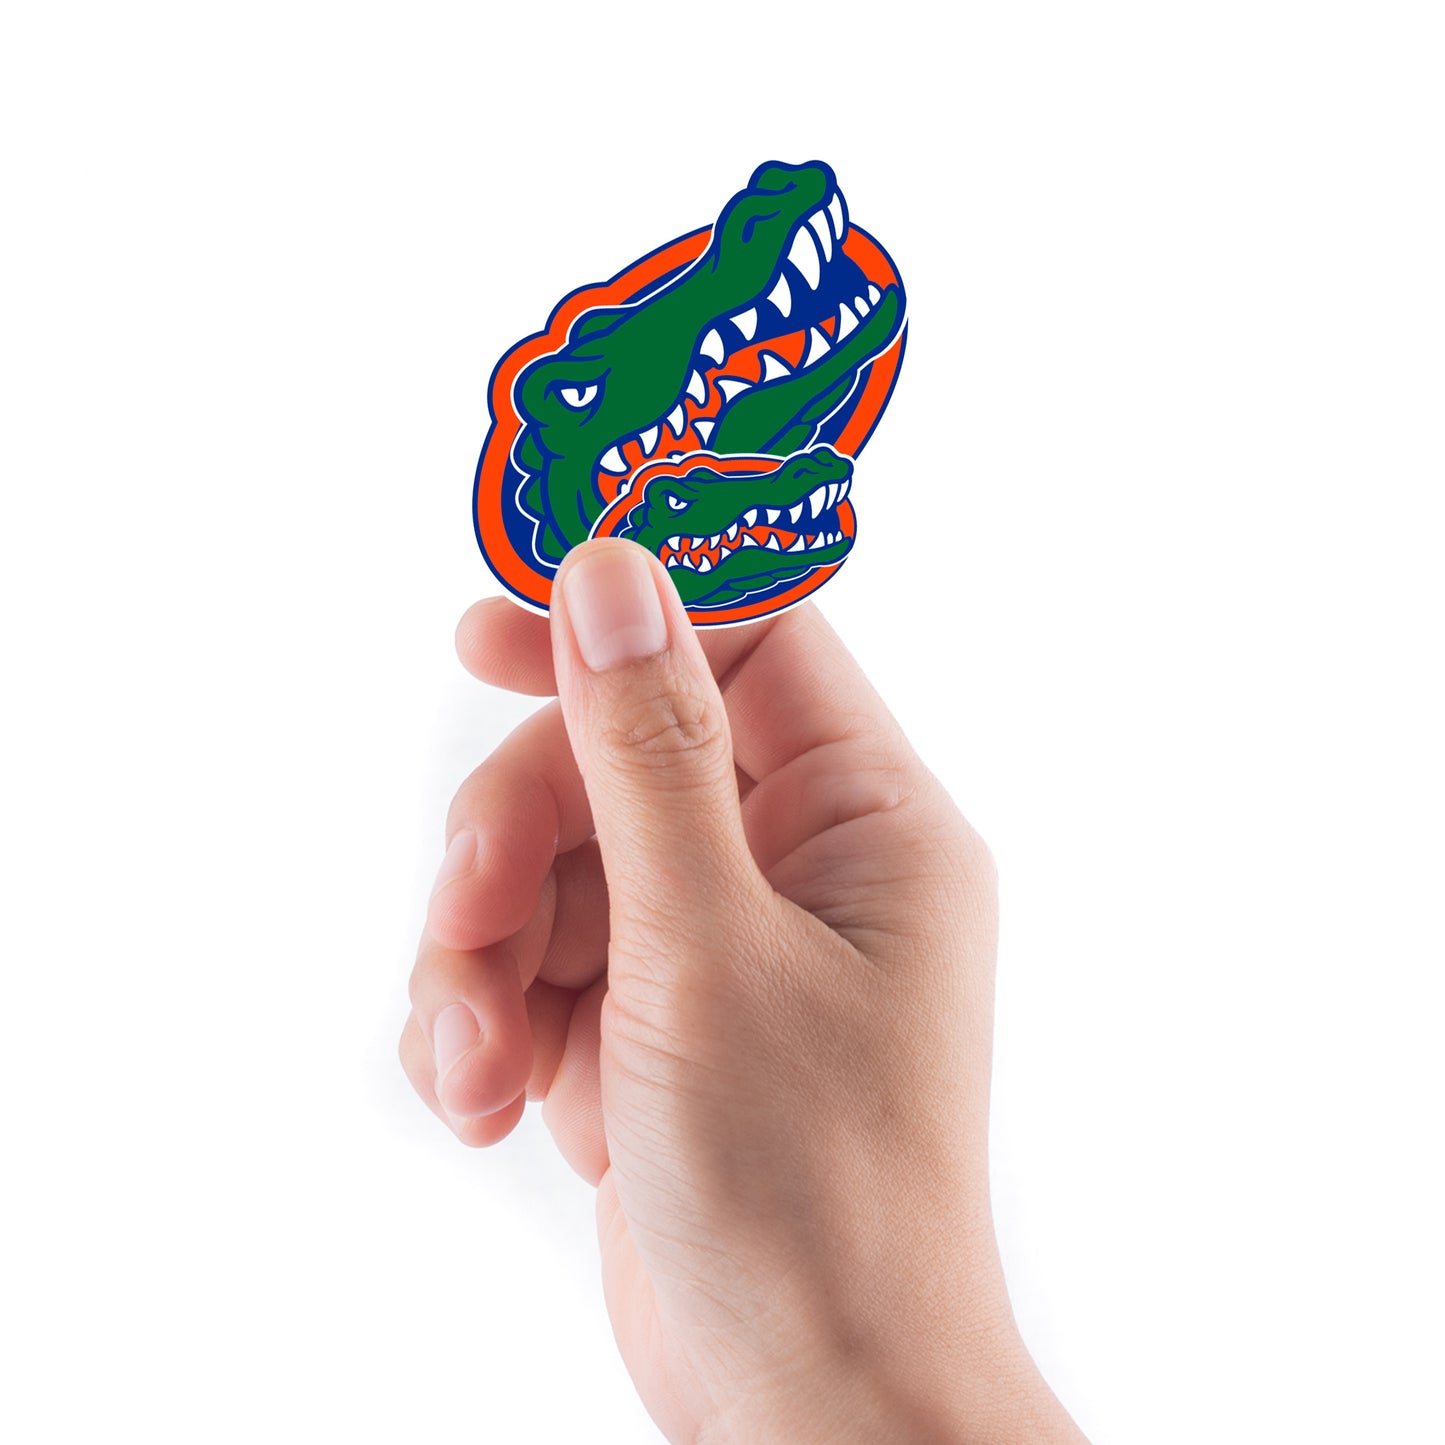 Sheet of 5 -U of Flordia: Florida Gators  Logo Minis        - Officially Licensed NCAA Removable    Adhesive Decal